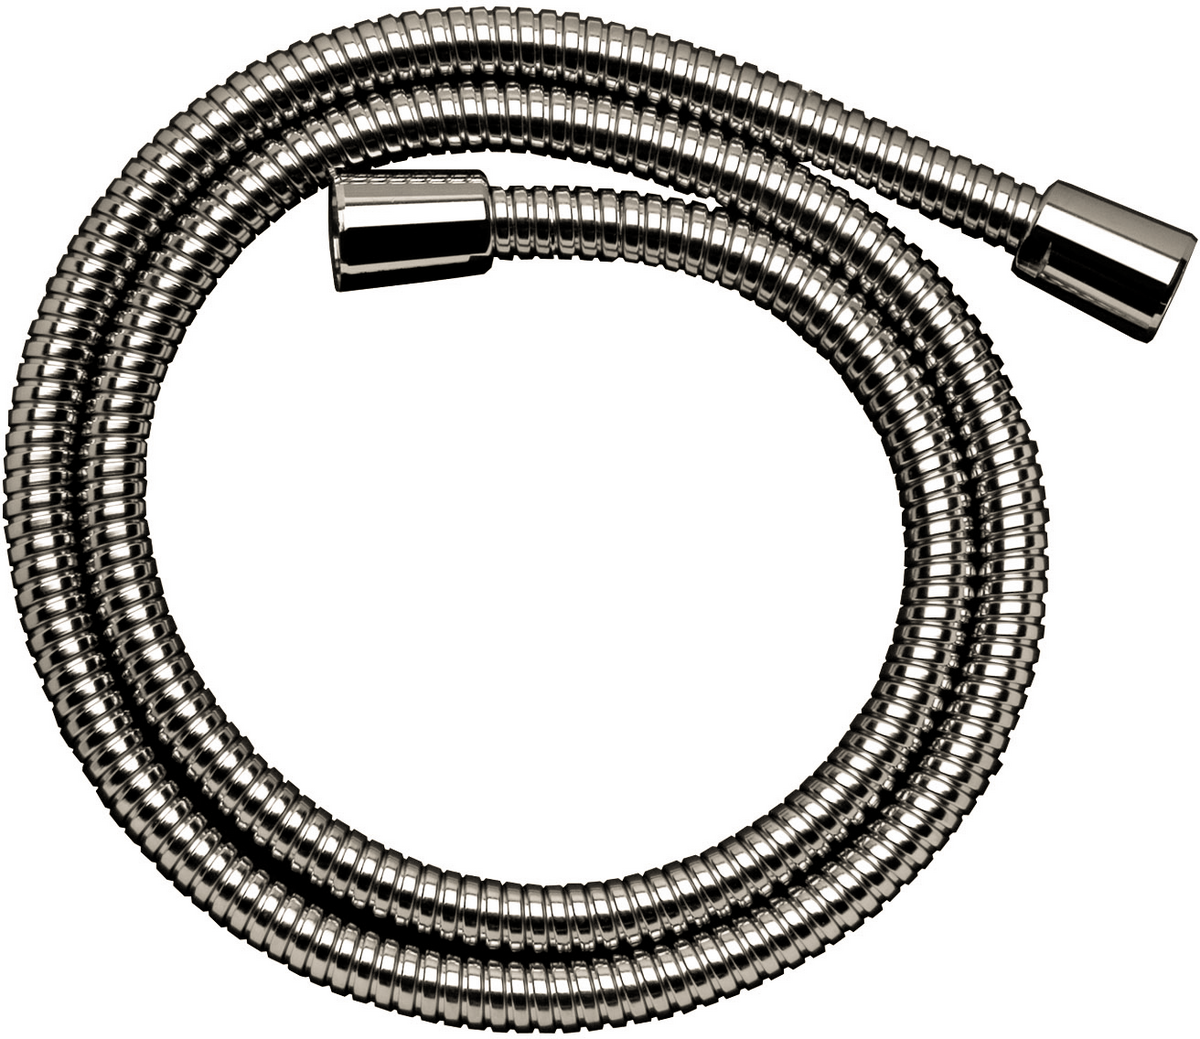 Picture of HANSGROHE Metal shower hose 1.25 m #28112830 - Polished Nickel